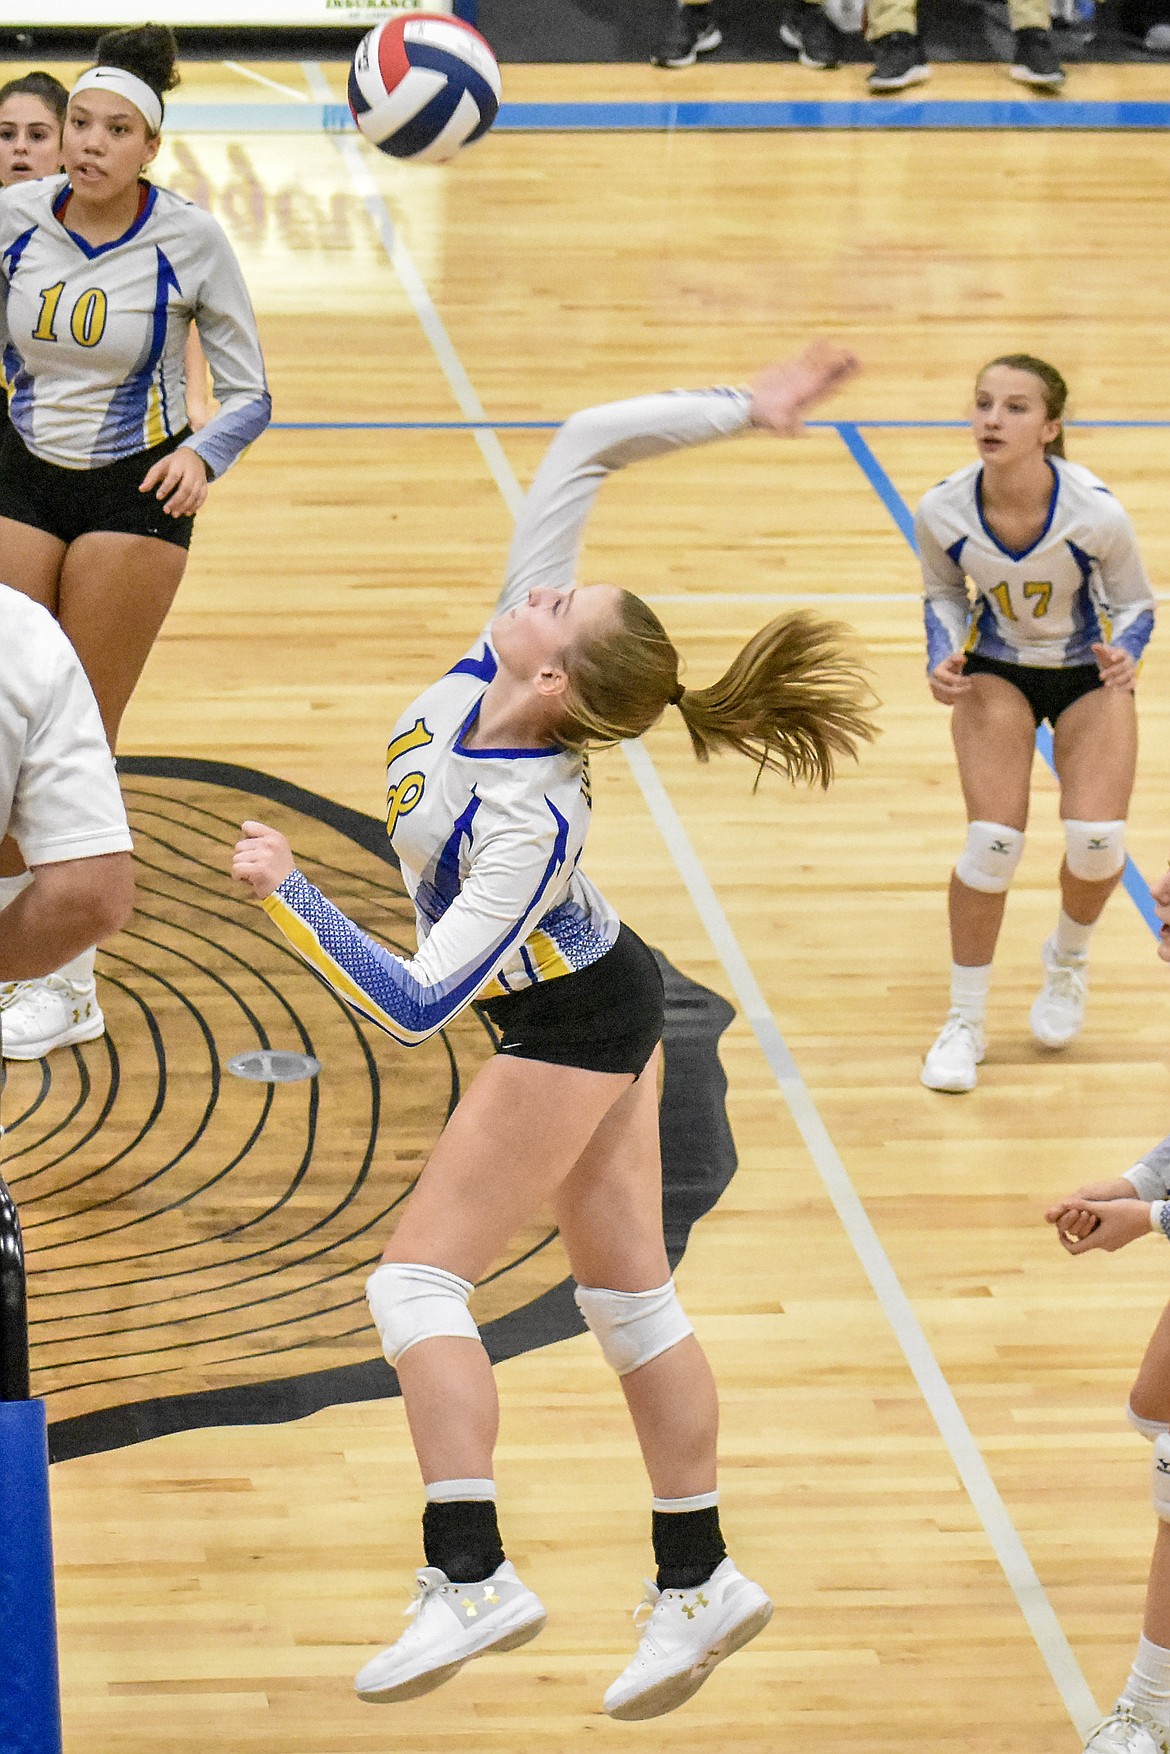 Libby senior Jessika Jones goes for a kill during the second set against Whitefish Saturday, as the Lady Loggers went on to win the 2018-2019 Northwest A District Championship in three. (Ben Kibbey/The Western News)